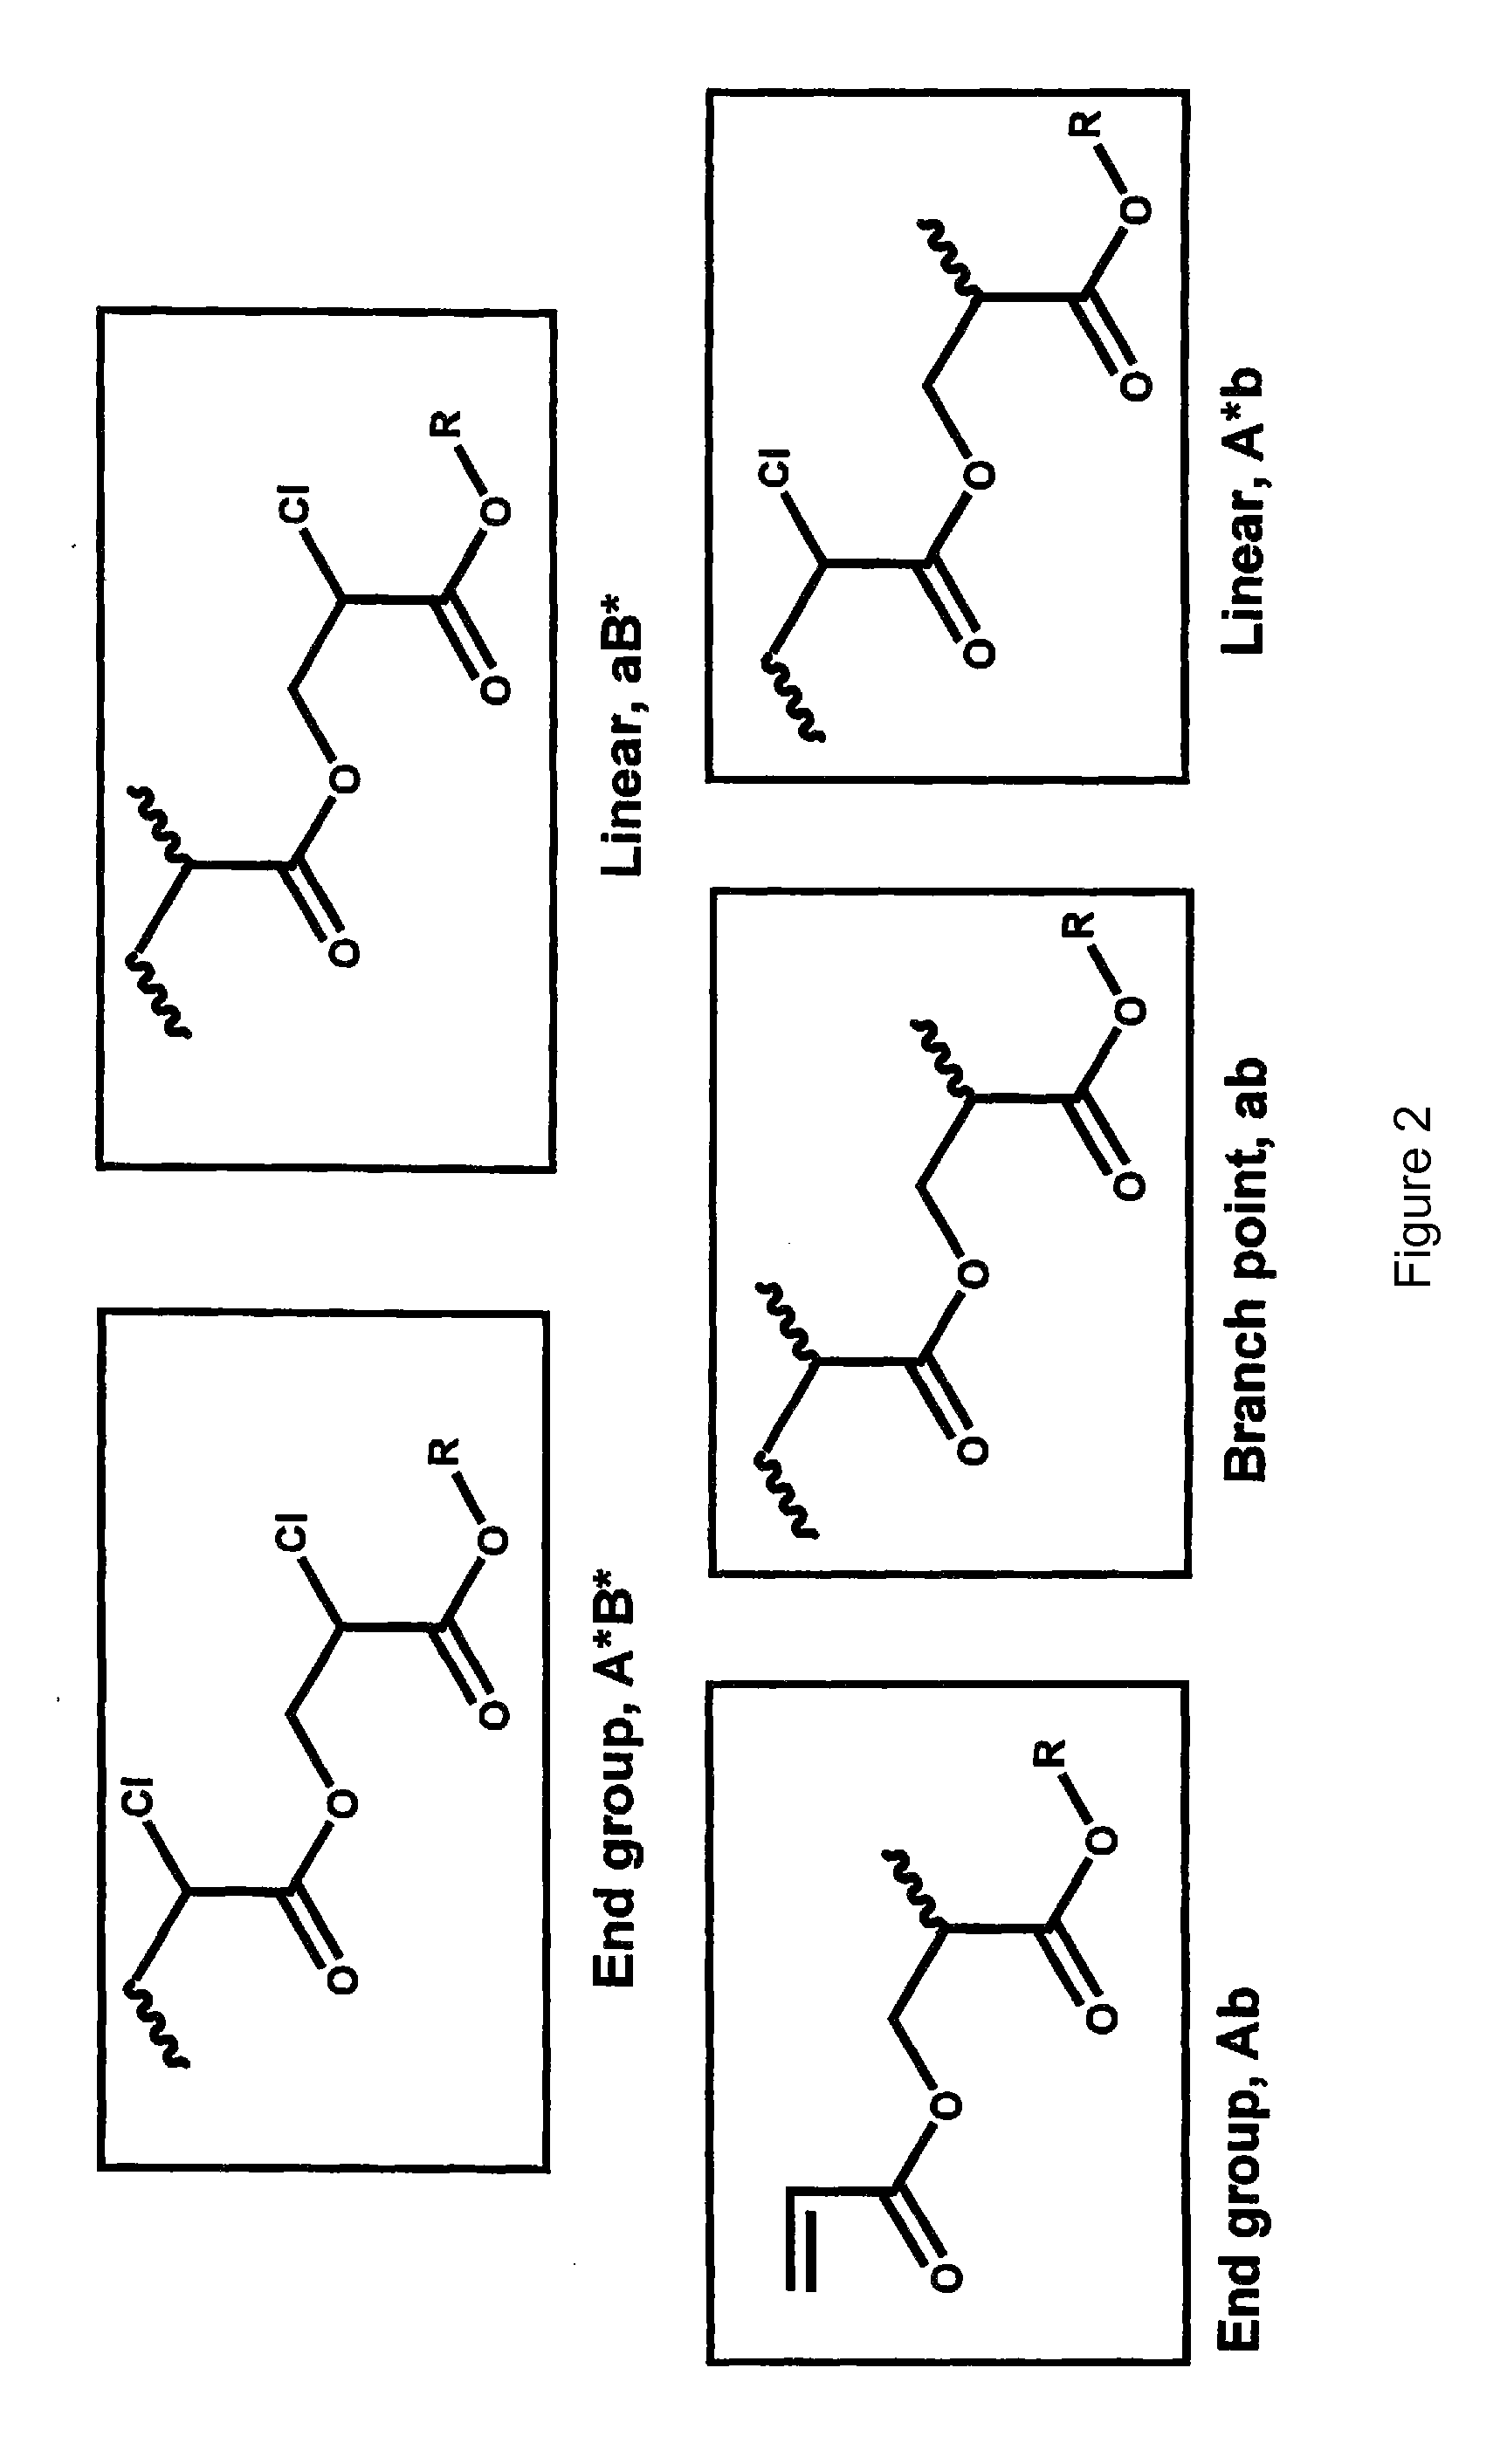 Synthesis of hyperbranched polyacrylates by emulsion polymerizsation of inimers